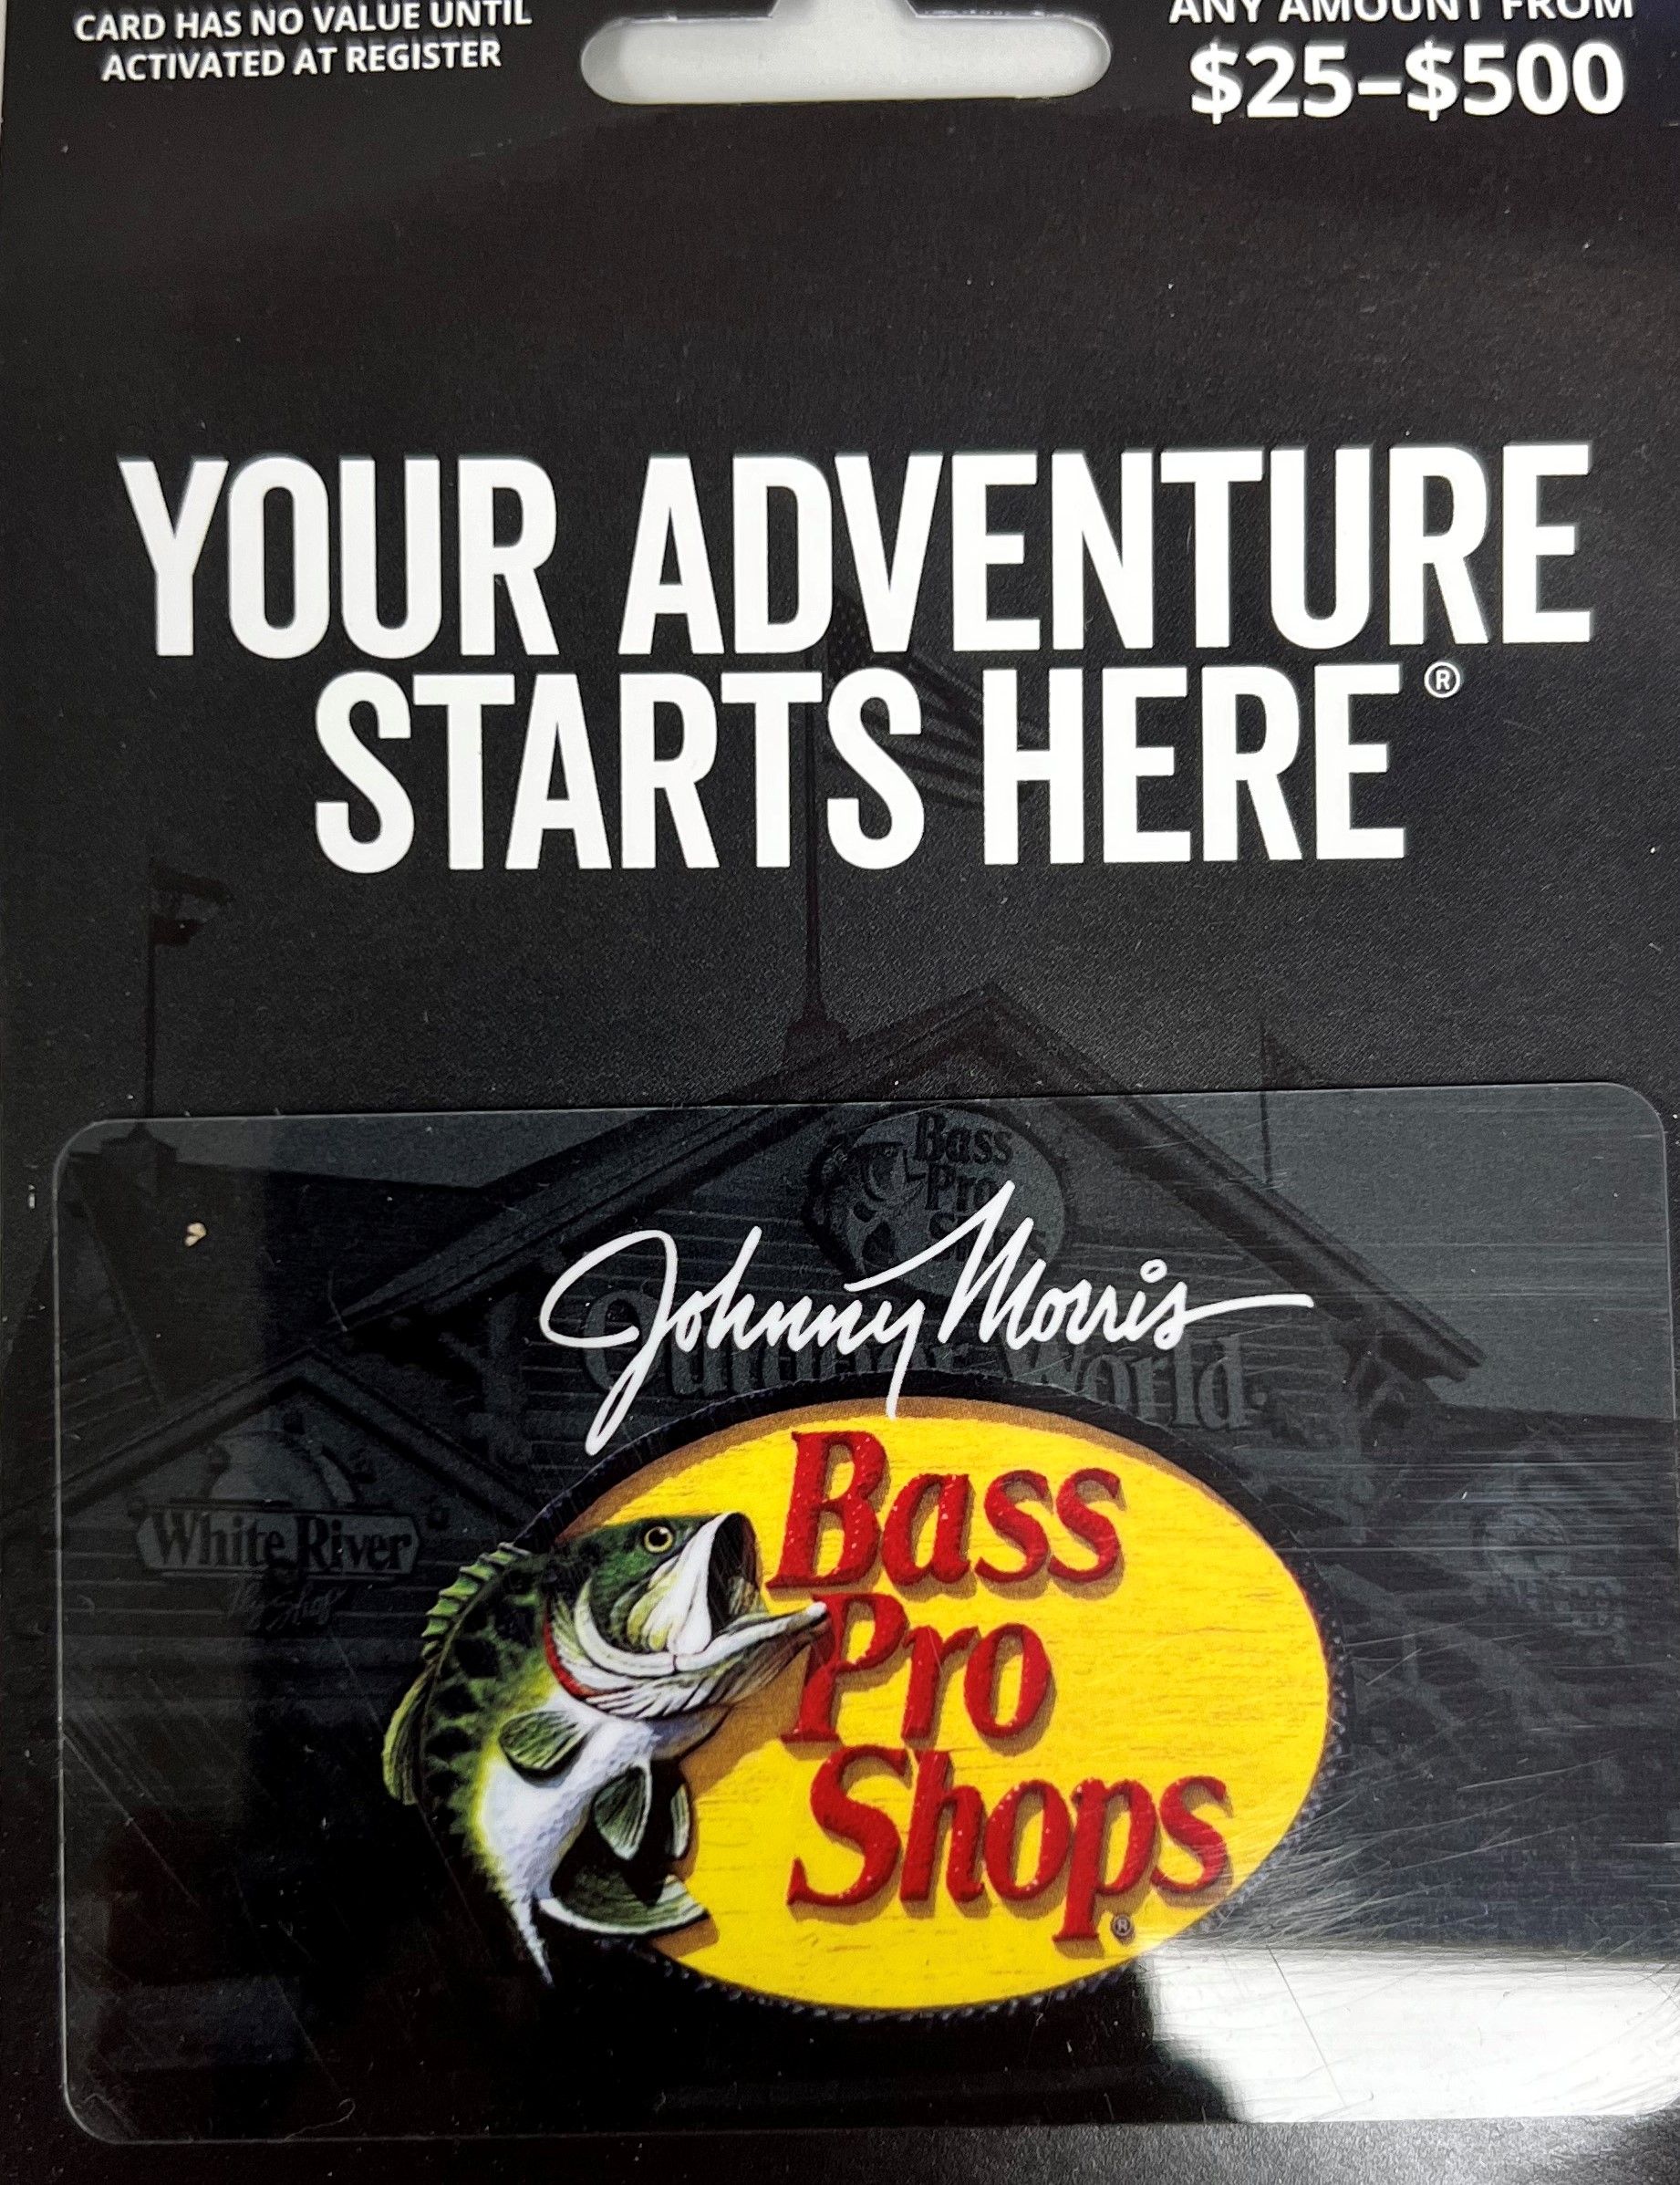 $50 Gift Certificate to Bass Pro